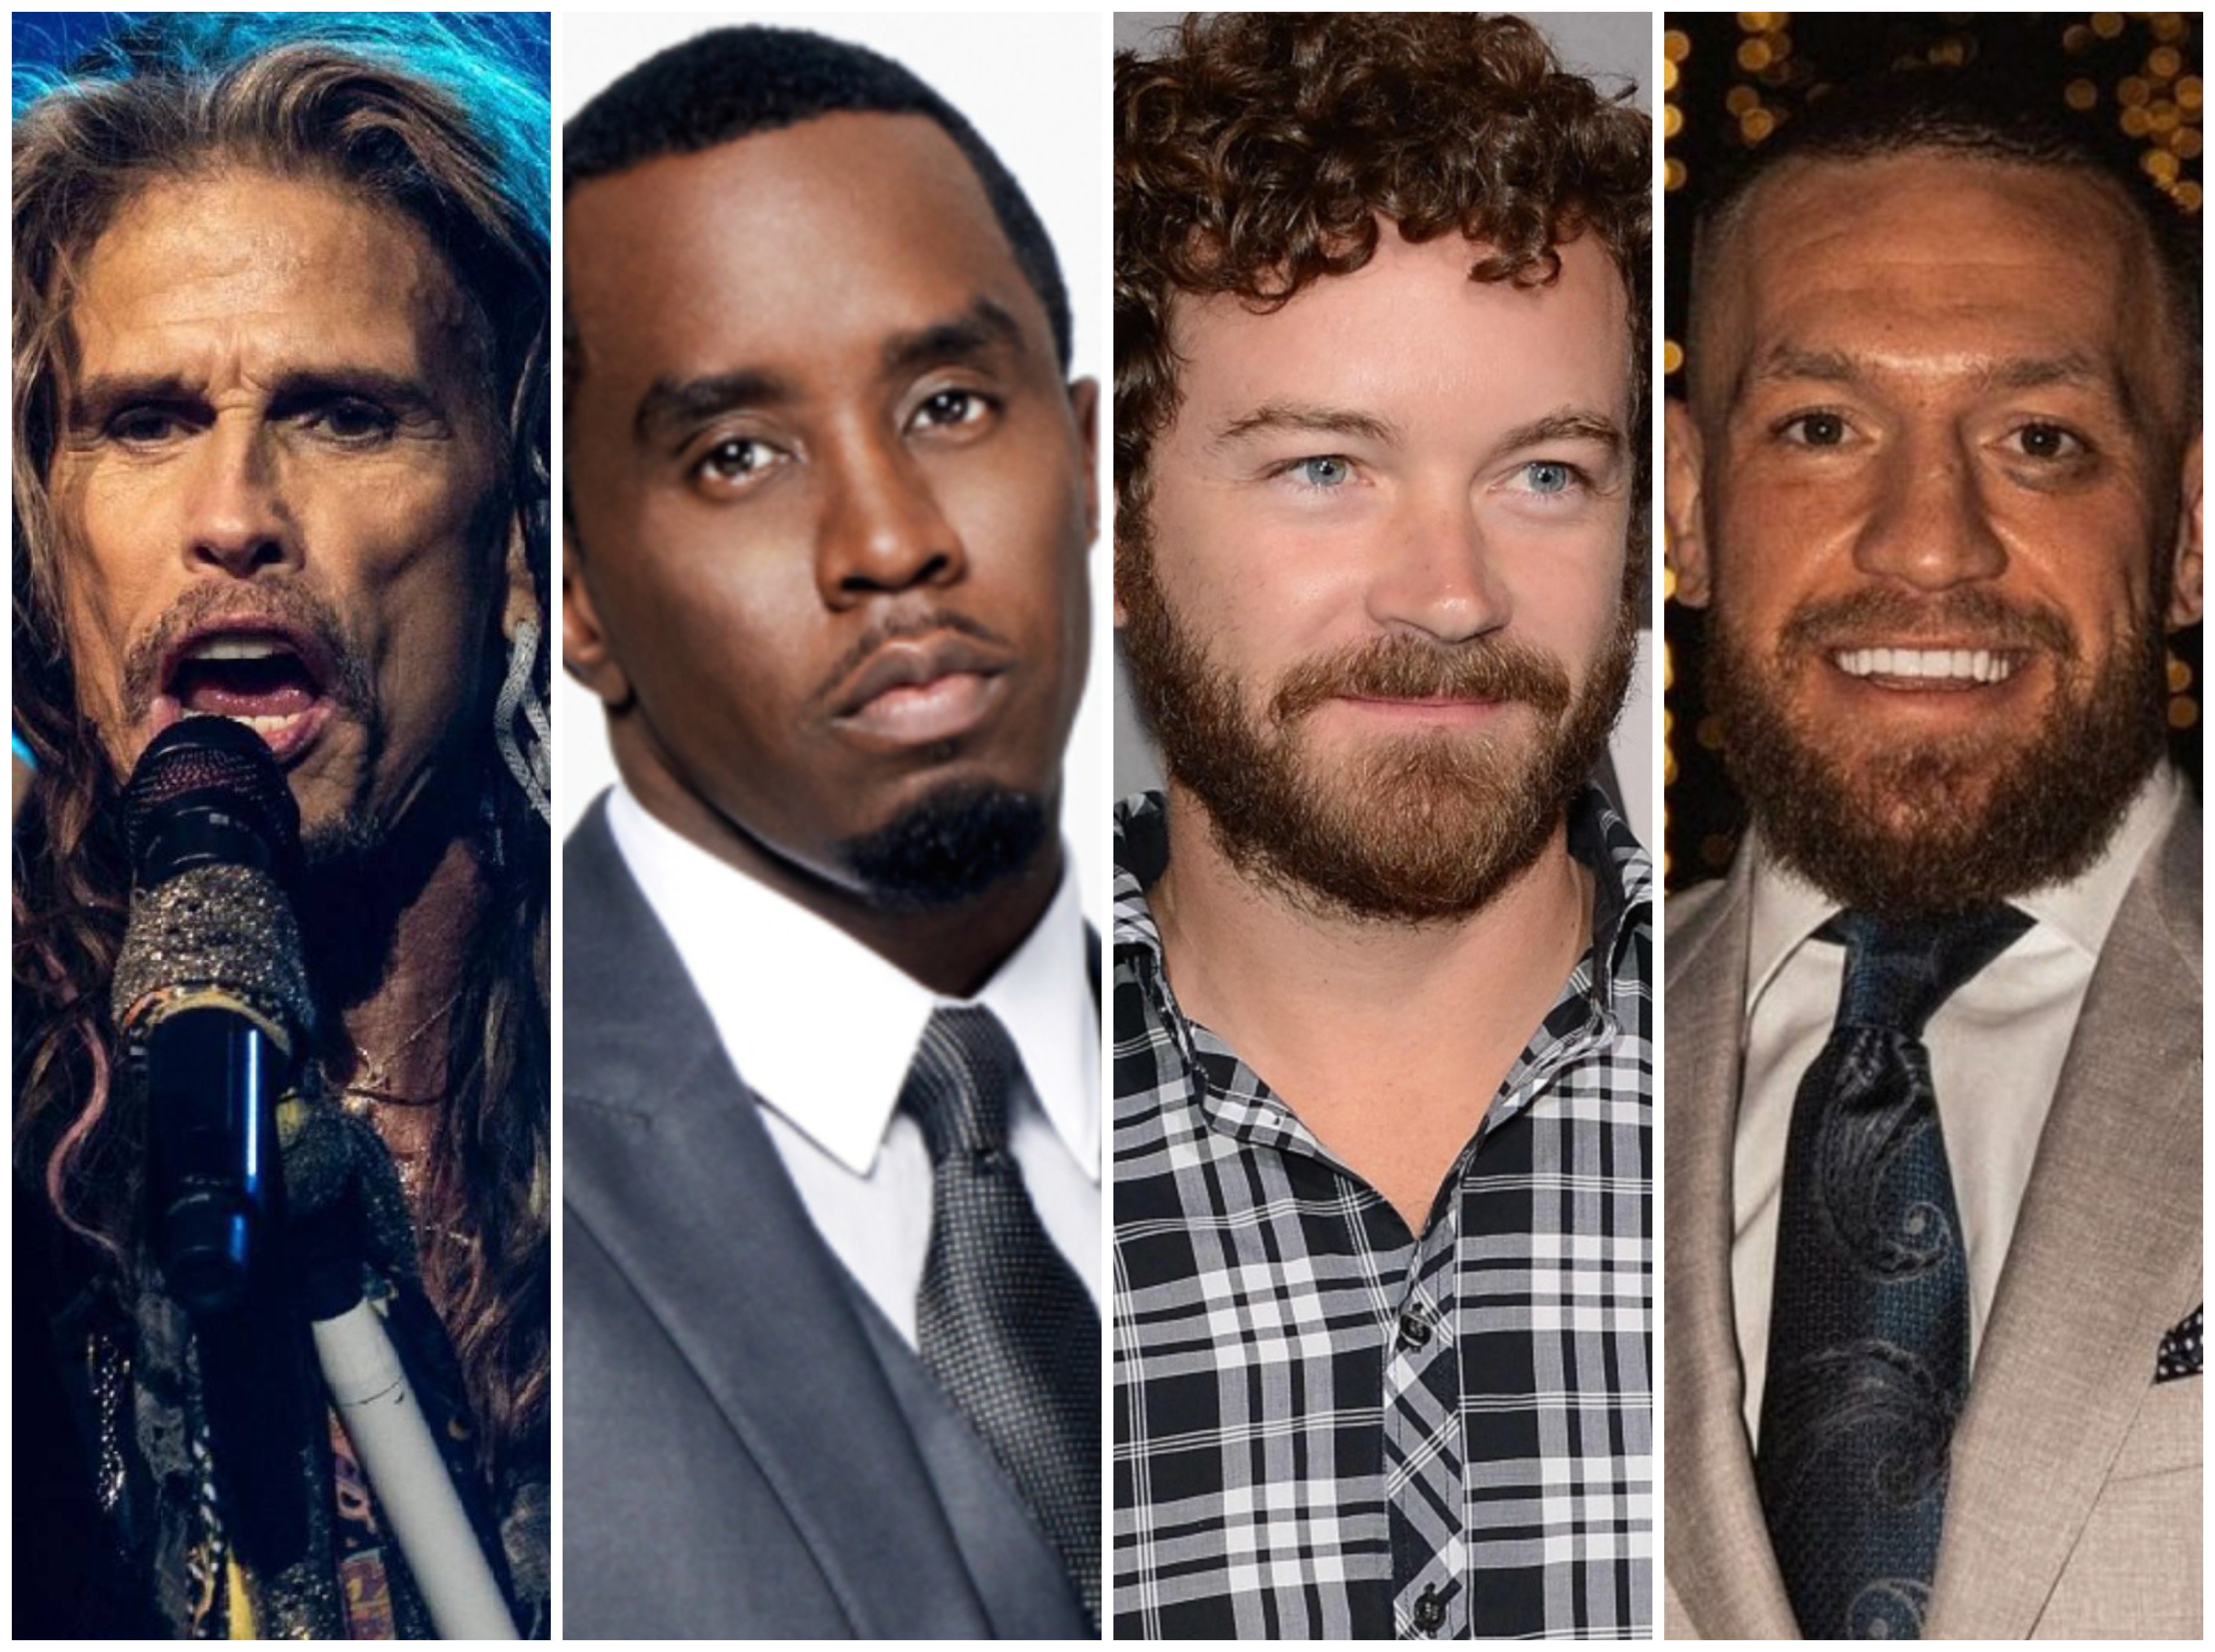 Steven Tyler, Sean “Diddy” Combs, Danny Masterson and Conor McGregor have all been accused of sexual assault – and, in Masterson’s case, convicted. Photos: @iamstevent, @thenotoriousmma/Instagram; Daniela Federici; AFP